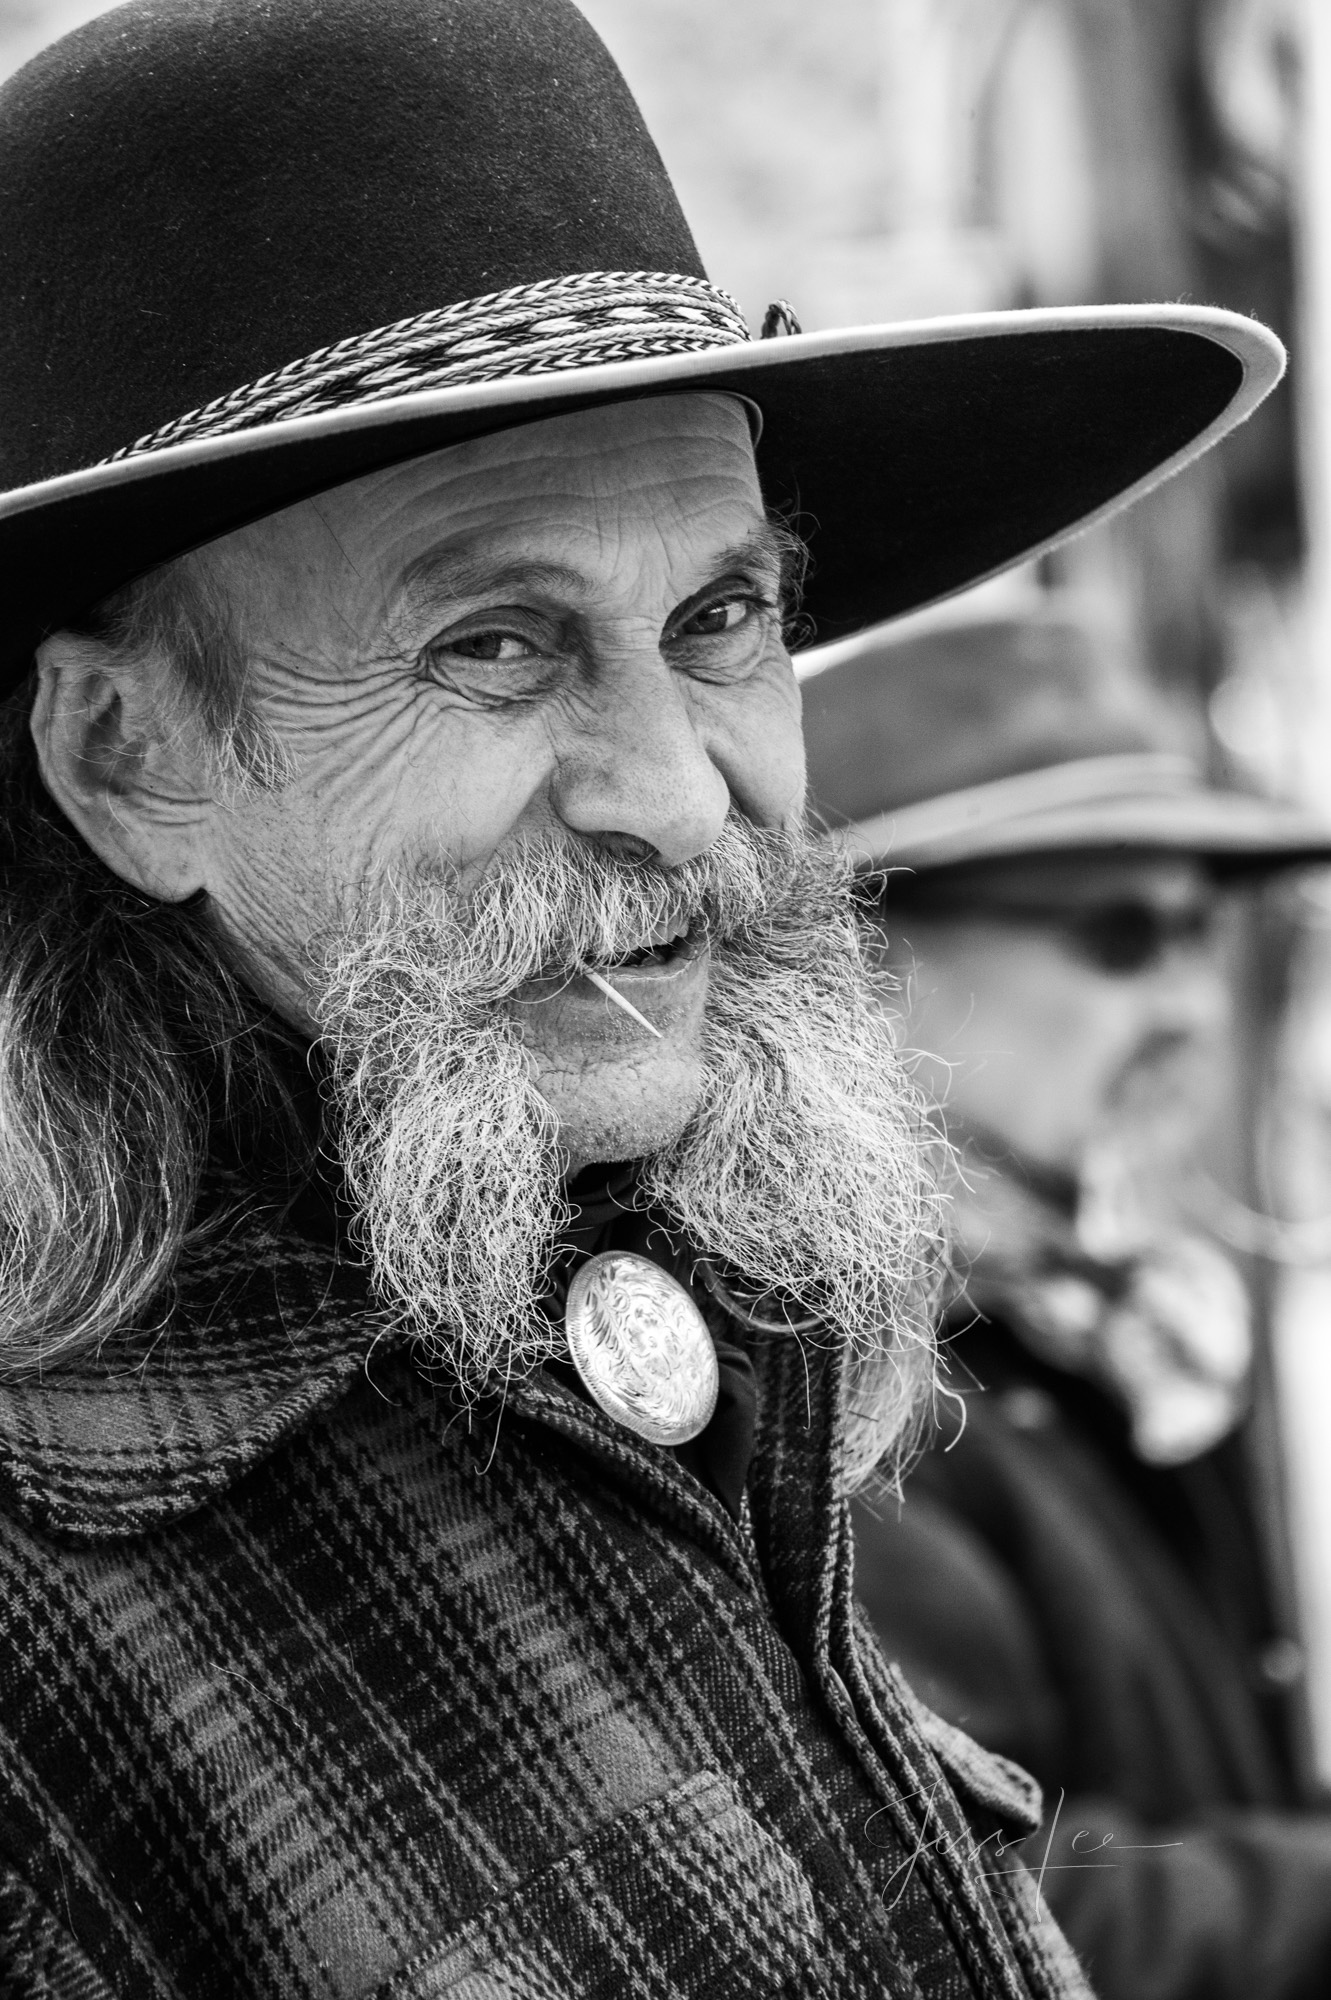 Fine Art Limited Edition Photo Prints of Cowboys, Horses, and life in the West. Happy Days Cowboy pictures in black and white...